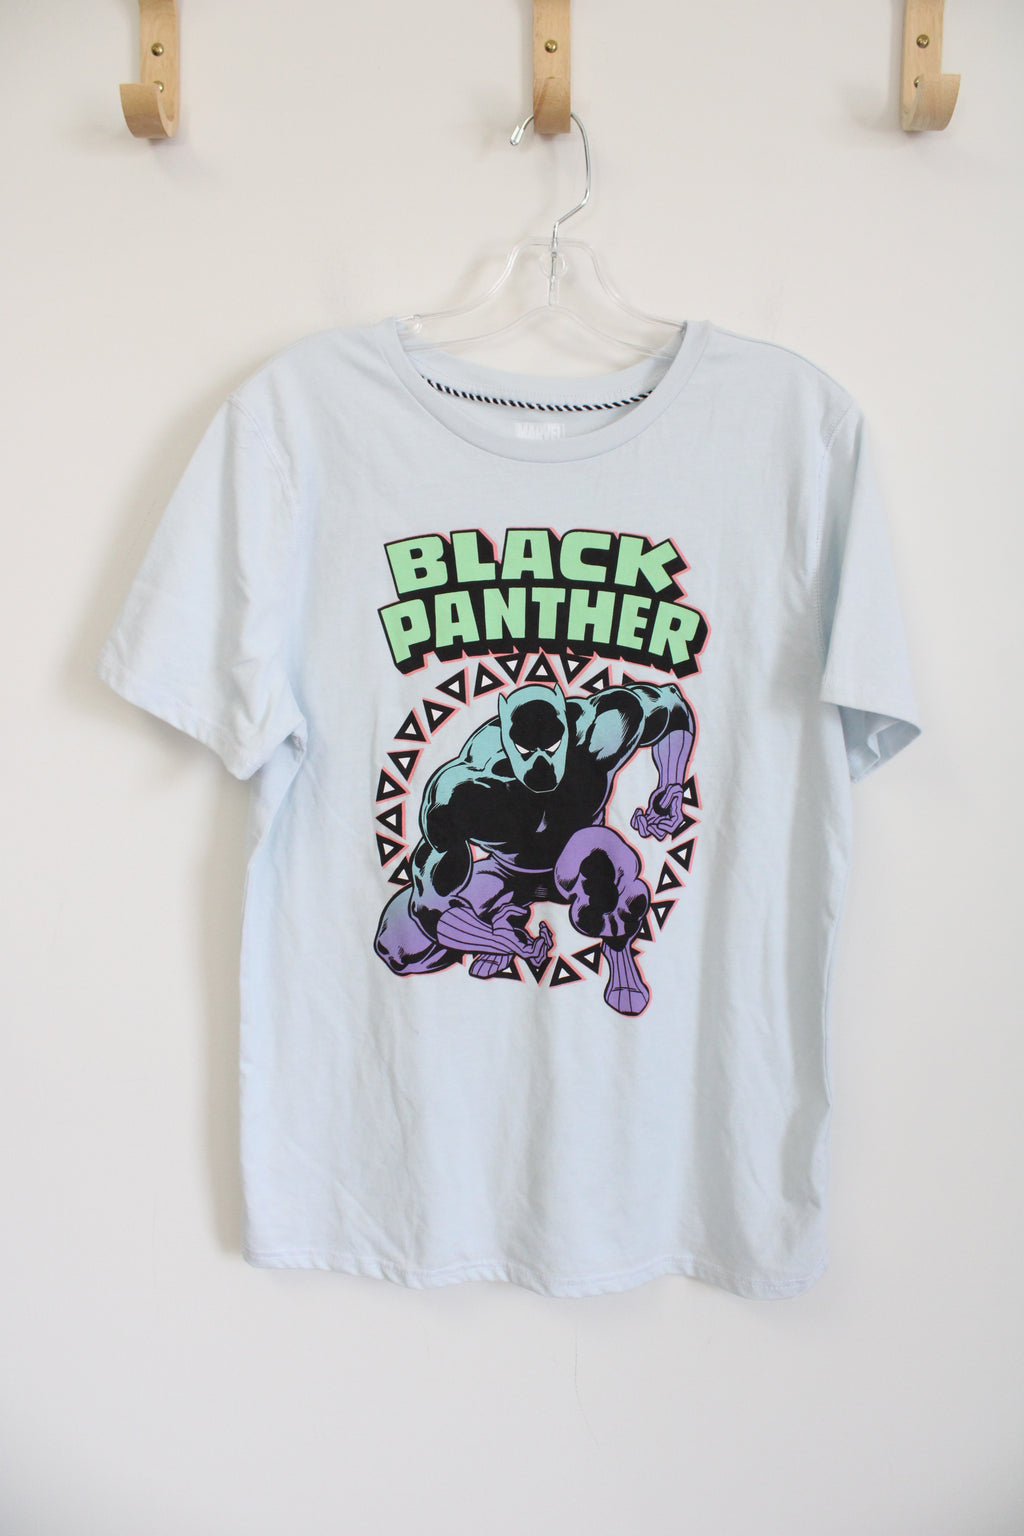 NEW Marvel Black Panther Tee | Youth XL (14/16)